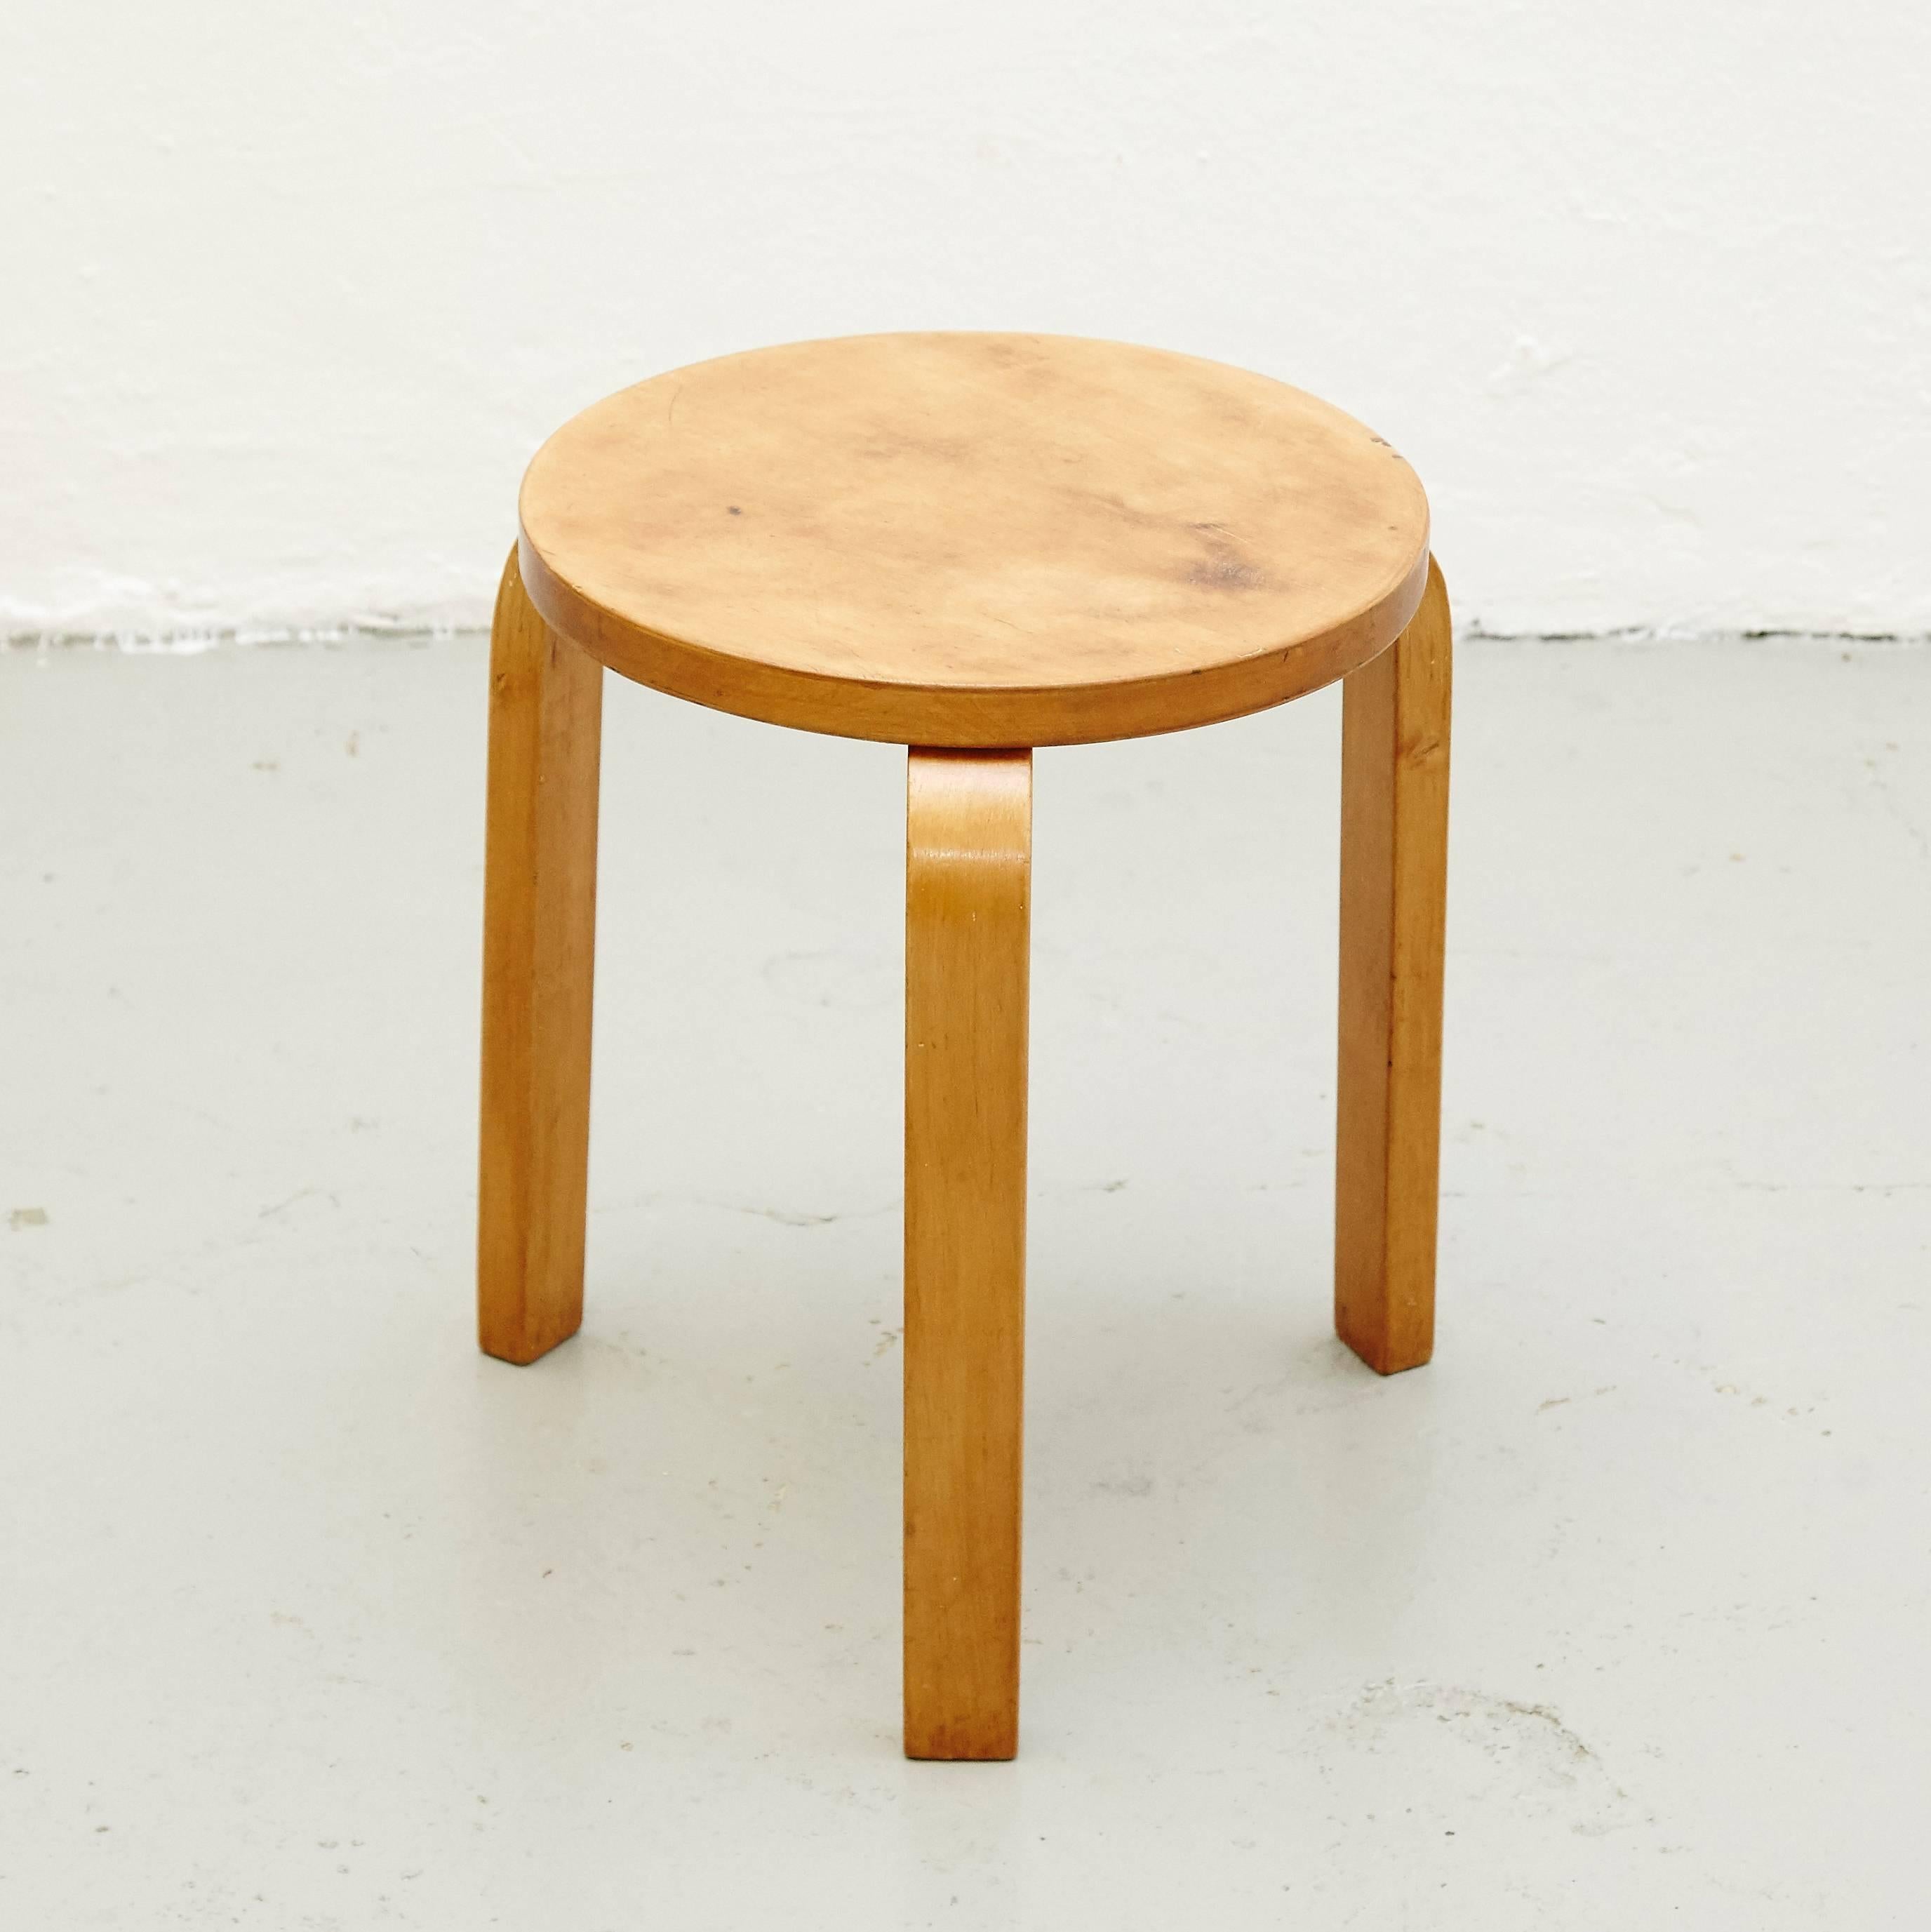 Stool designed by Alvar Aalto, circa 1950.
Manufactured by Artek (Finland.)
Wood legs and structure.

In original condition, with minor wear consistent with age and use, preserving a beautiful patina.

We offer free worlwide shipping for this